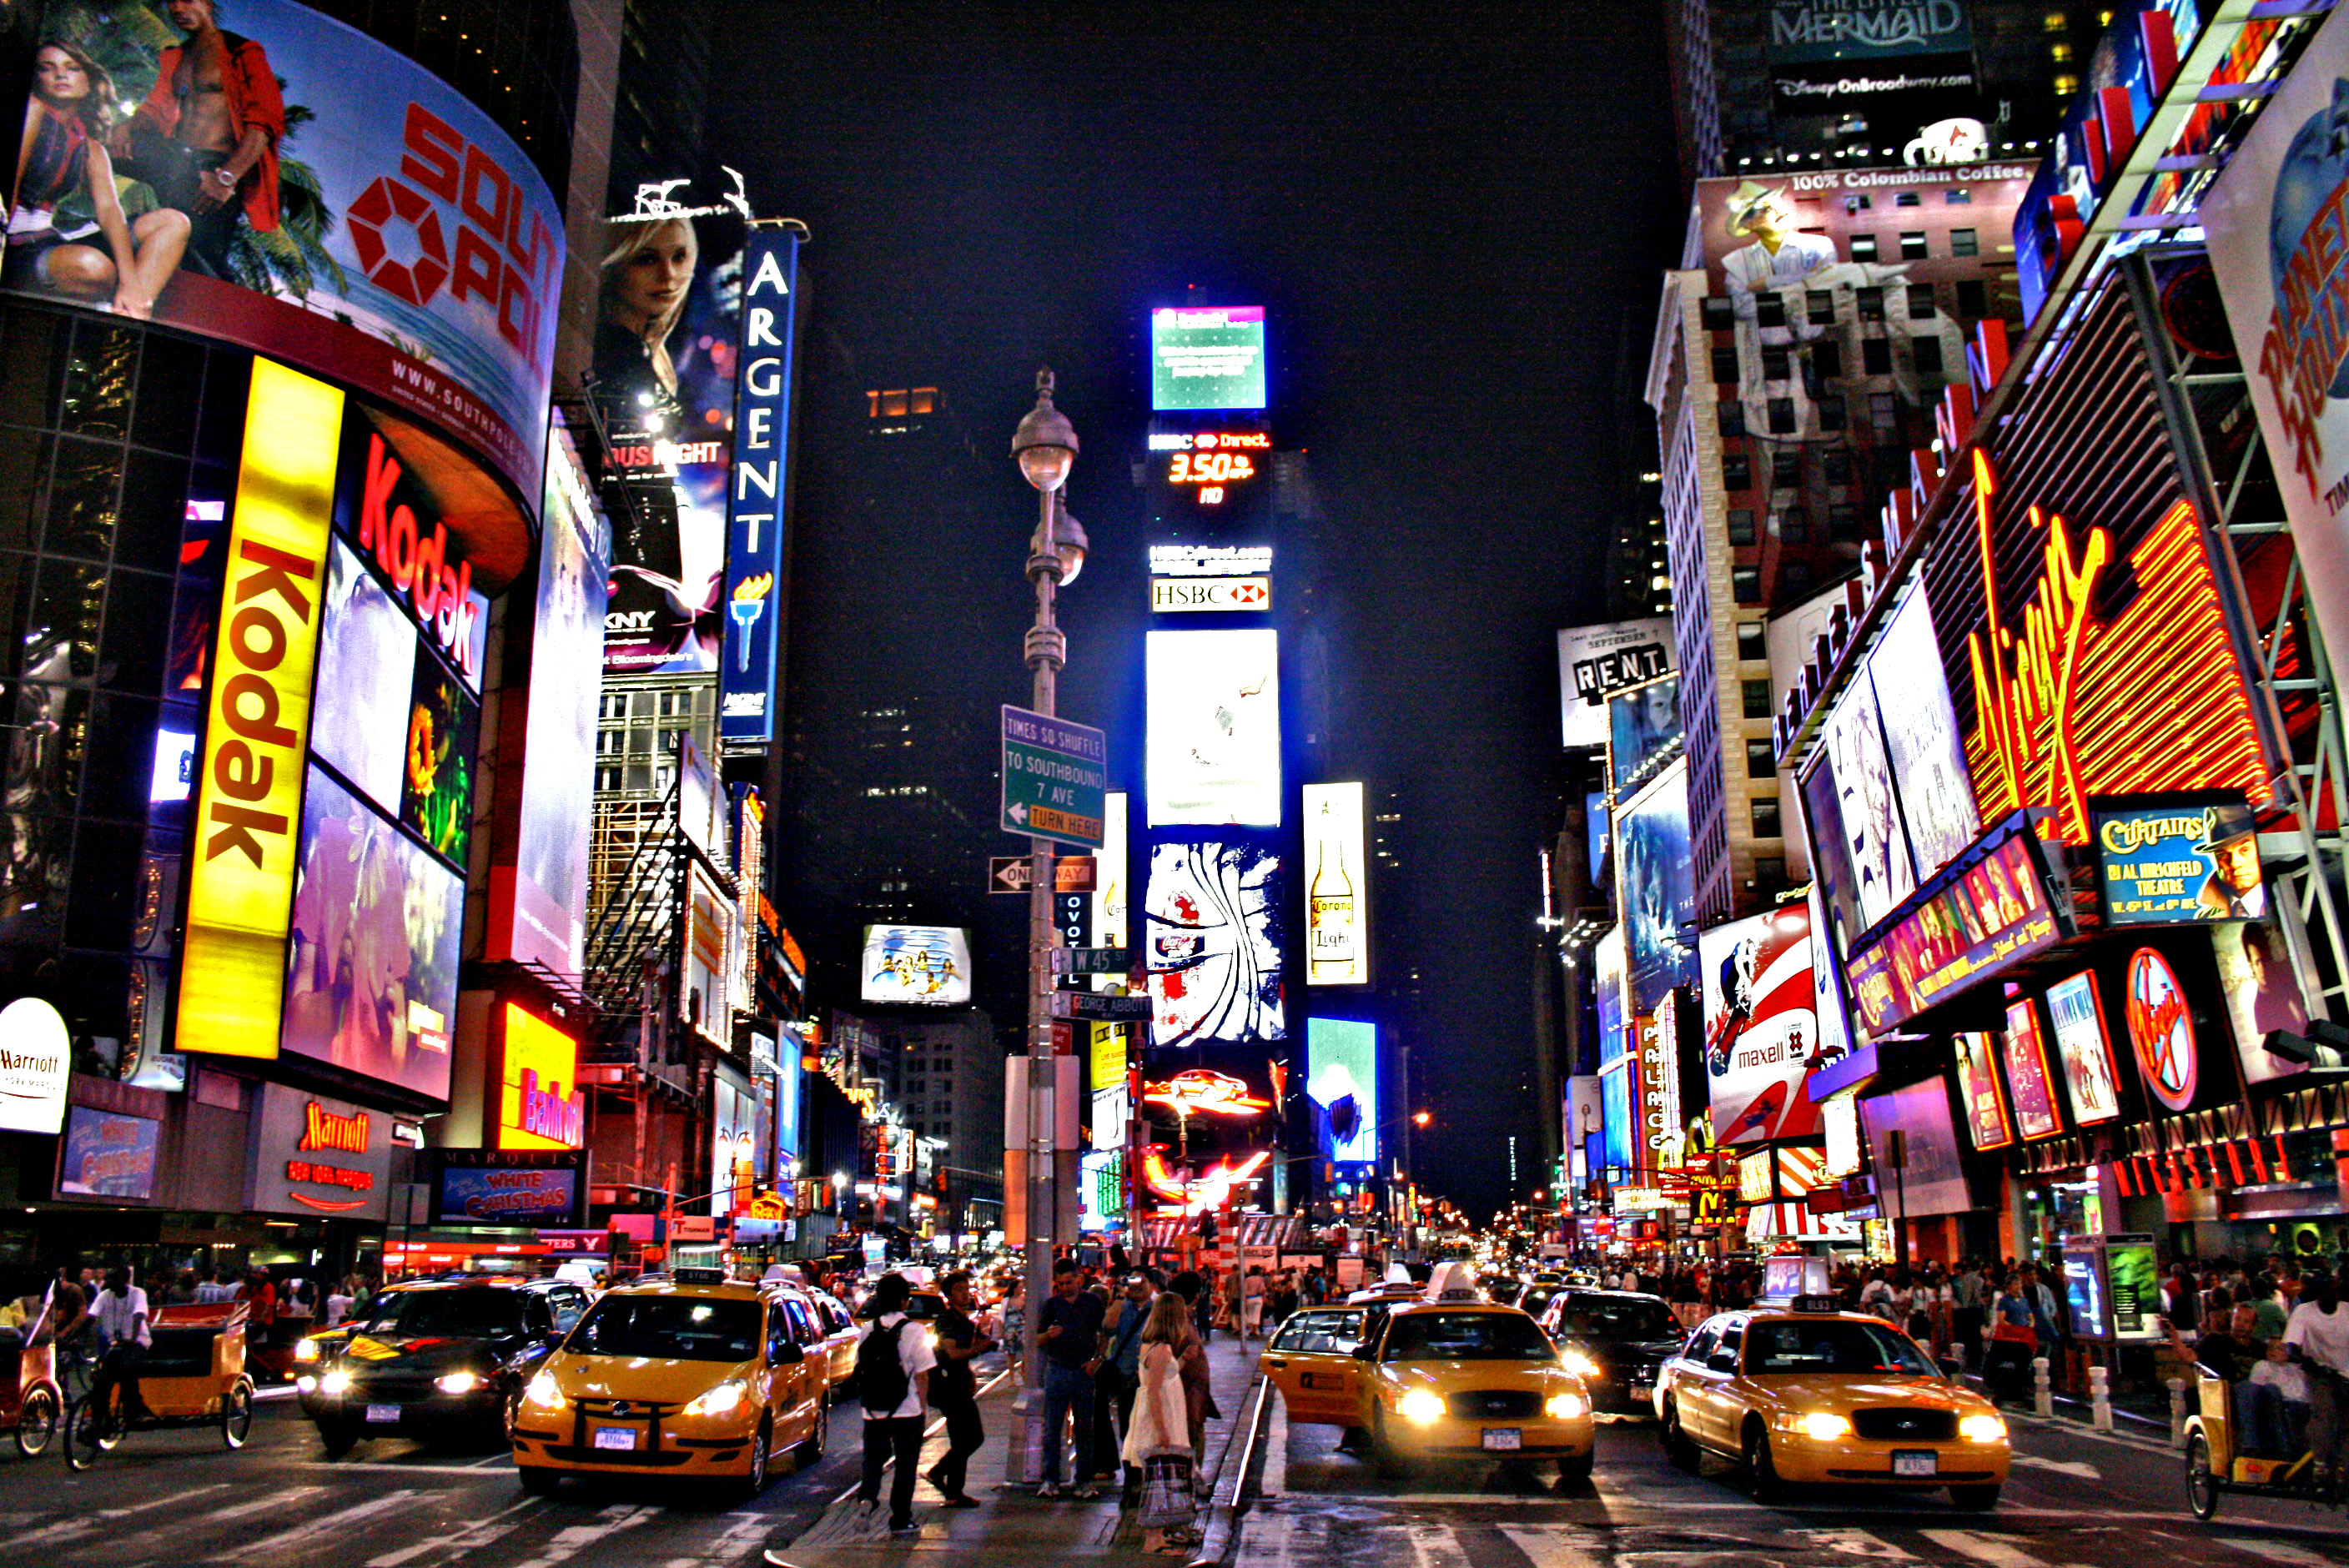 New York Sights with Free Wi-Fi | TopView